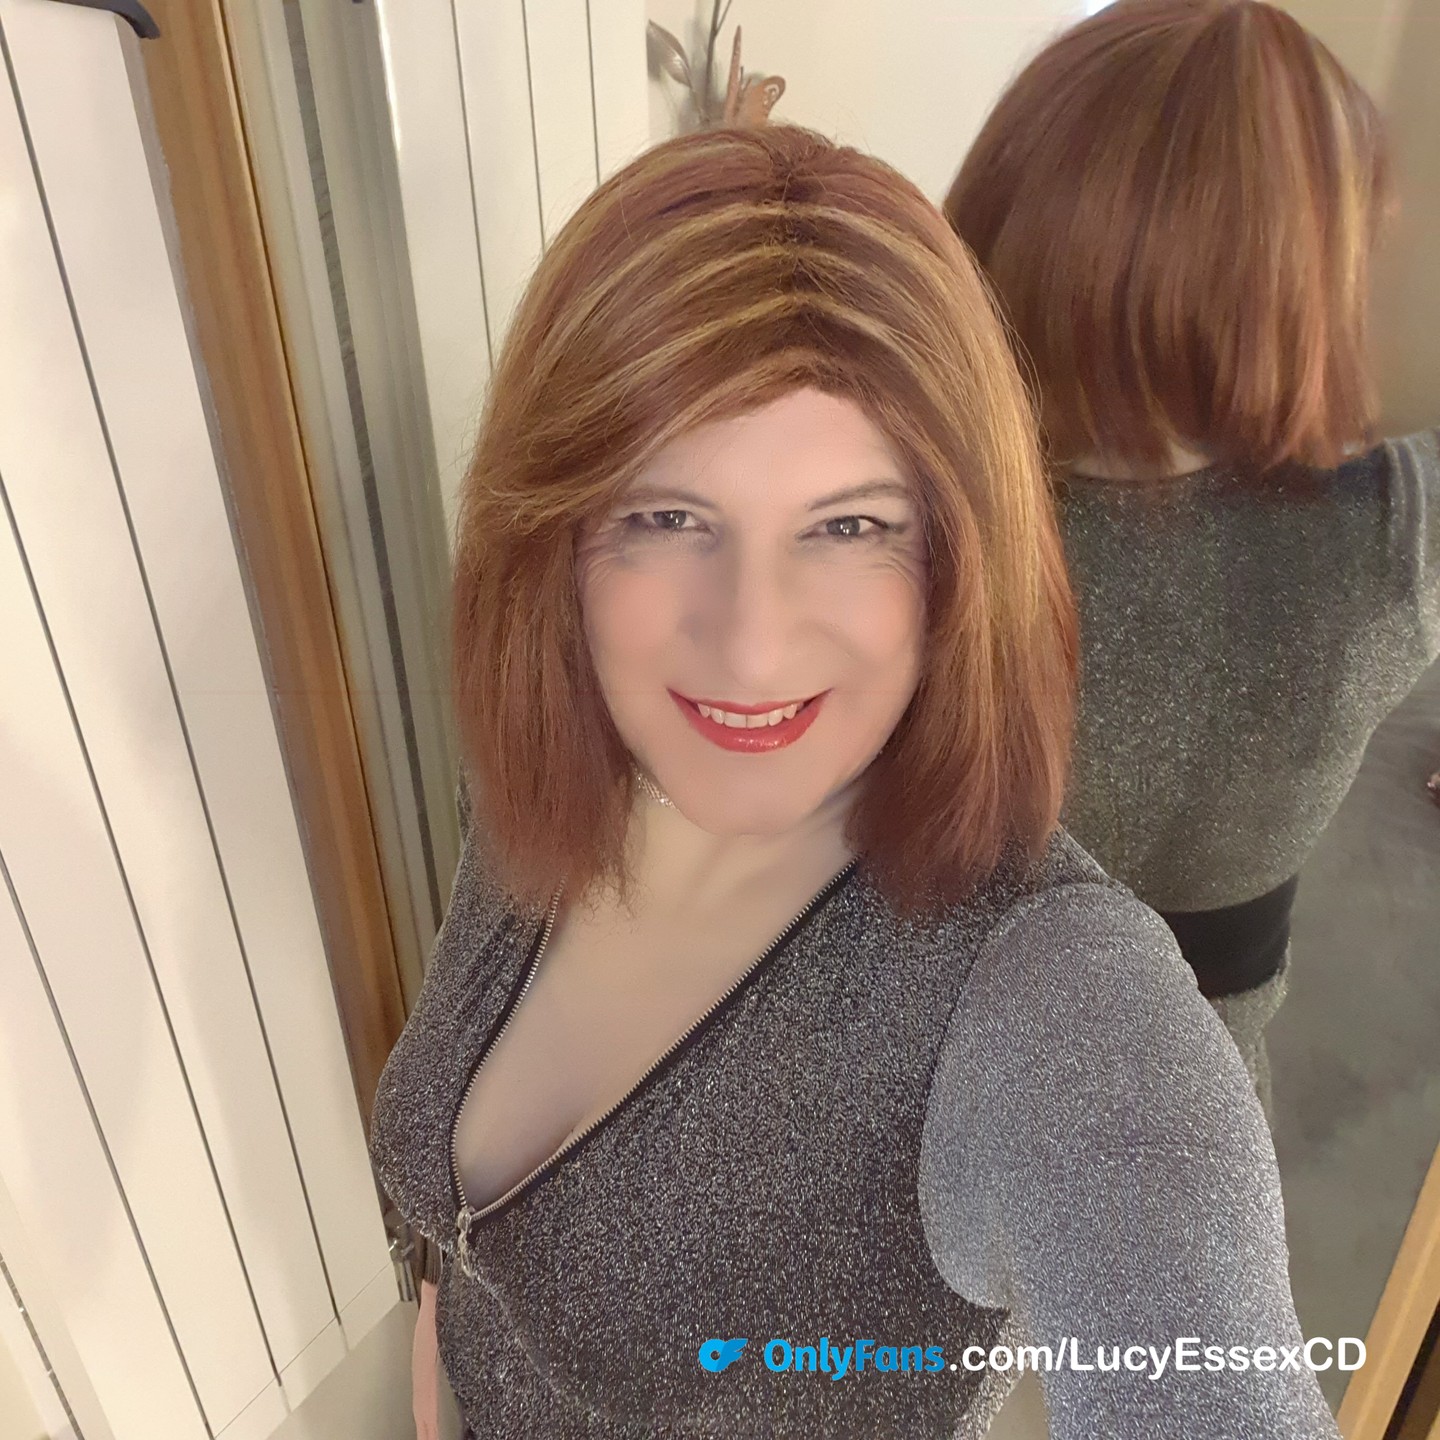 It's selfie time xXx

Check out my OnlyFans for more https://onlyfans.com/lucyessexcd

Subscribers get full access to thousands of my photos and videos with new and exclusive content being added all the time.

#tgirl #tgirleyecandy #tgirlsdoitbetter #tgirlselfie #tgirlselfies #tgirlsofinstagram #tgirlgoddesses #tgirlsarebeautiful #tgirldoitbetter #sexytgirl #crossdressing #crossdresseruk #crossdressers #crossdressed #lgbt #lgbtpride #lgbtq #trans #transisbeautiful #transpride #redhead #selfie